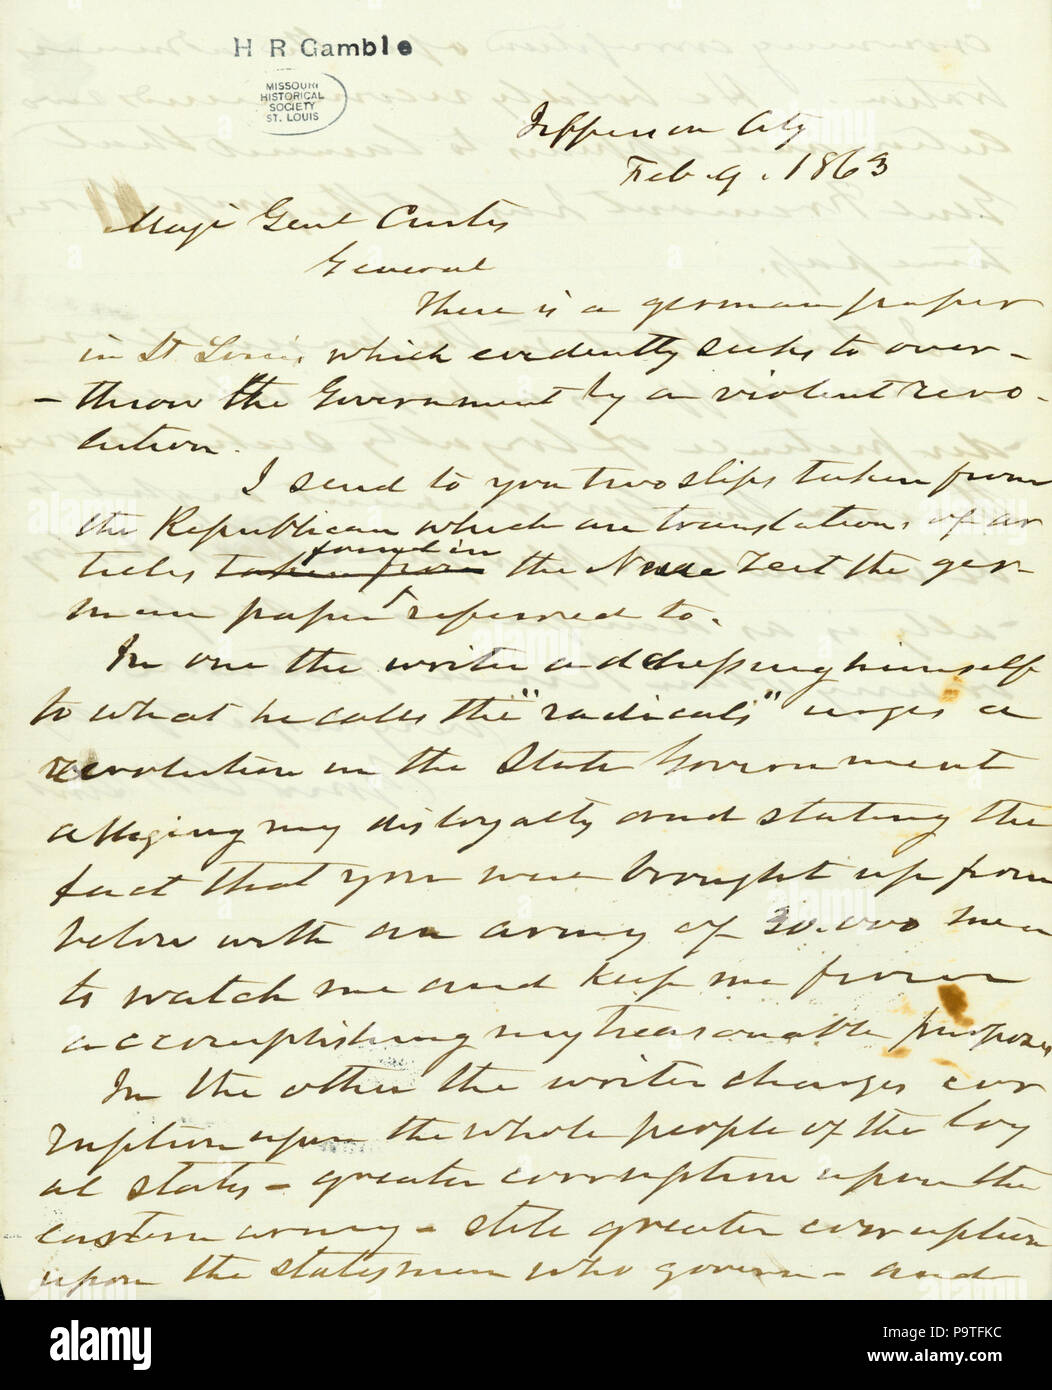 347 Contemporary copy of unsigned letter, Jefferson City, to Maj. Gen. Curtis (Samuel R. Curtis), February 9, 1863 Stock Photo